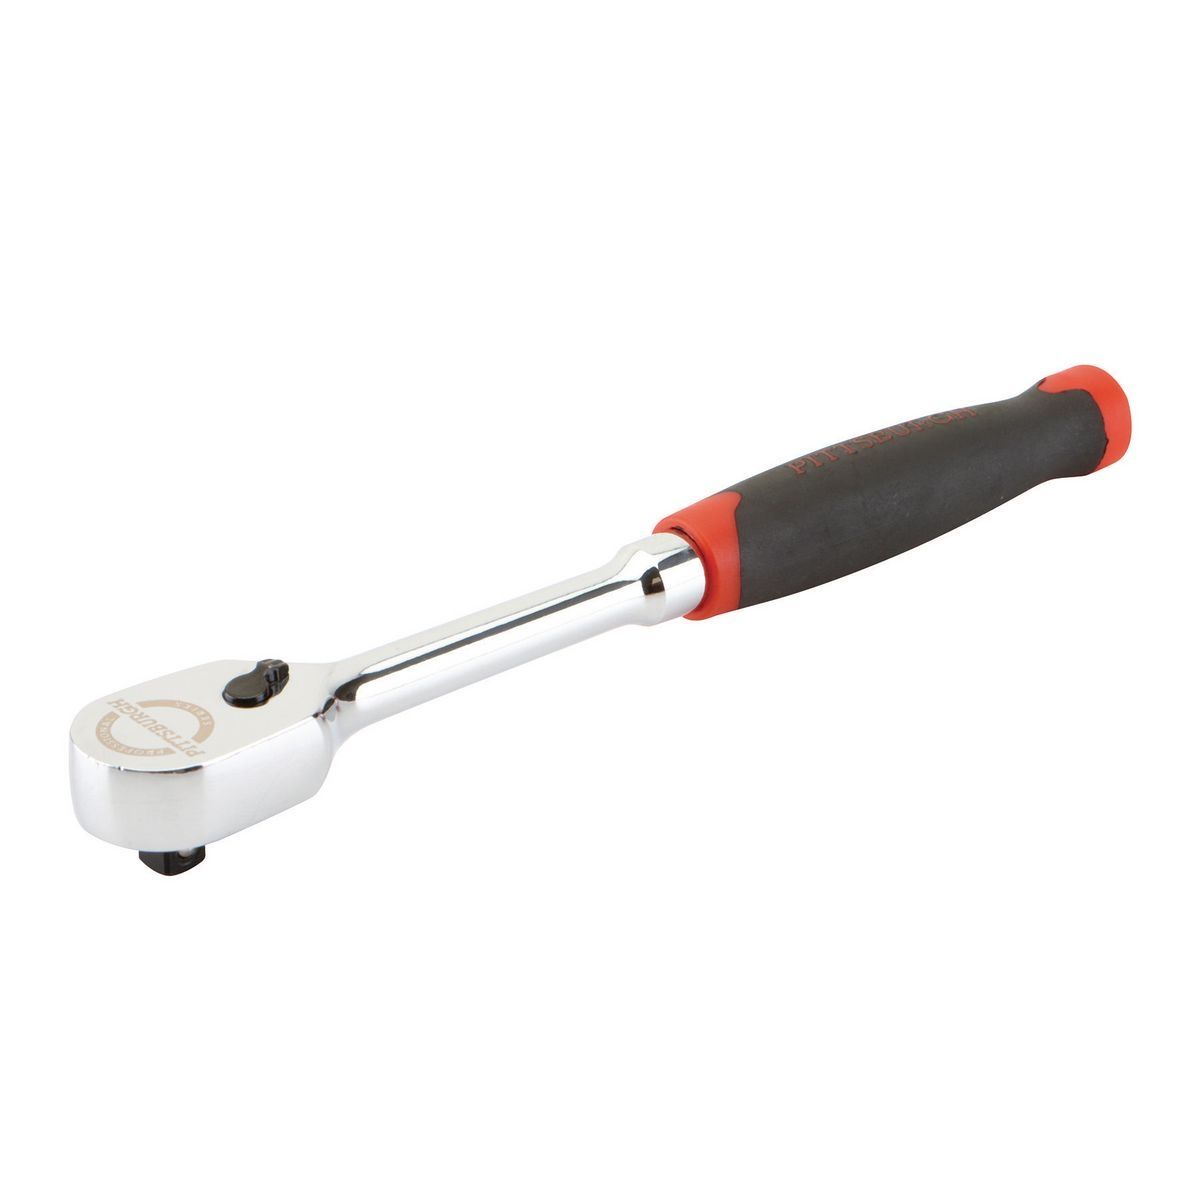 PITTSBURGH PRO 1/4 in. Drive Low-Profile Ratchet